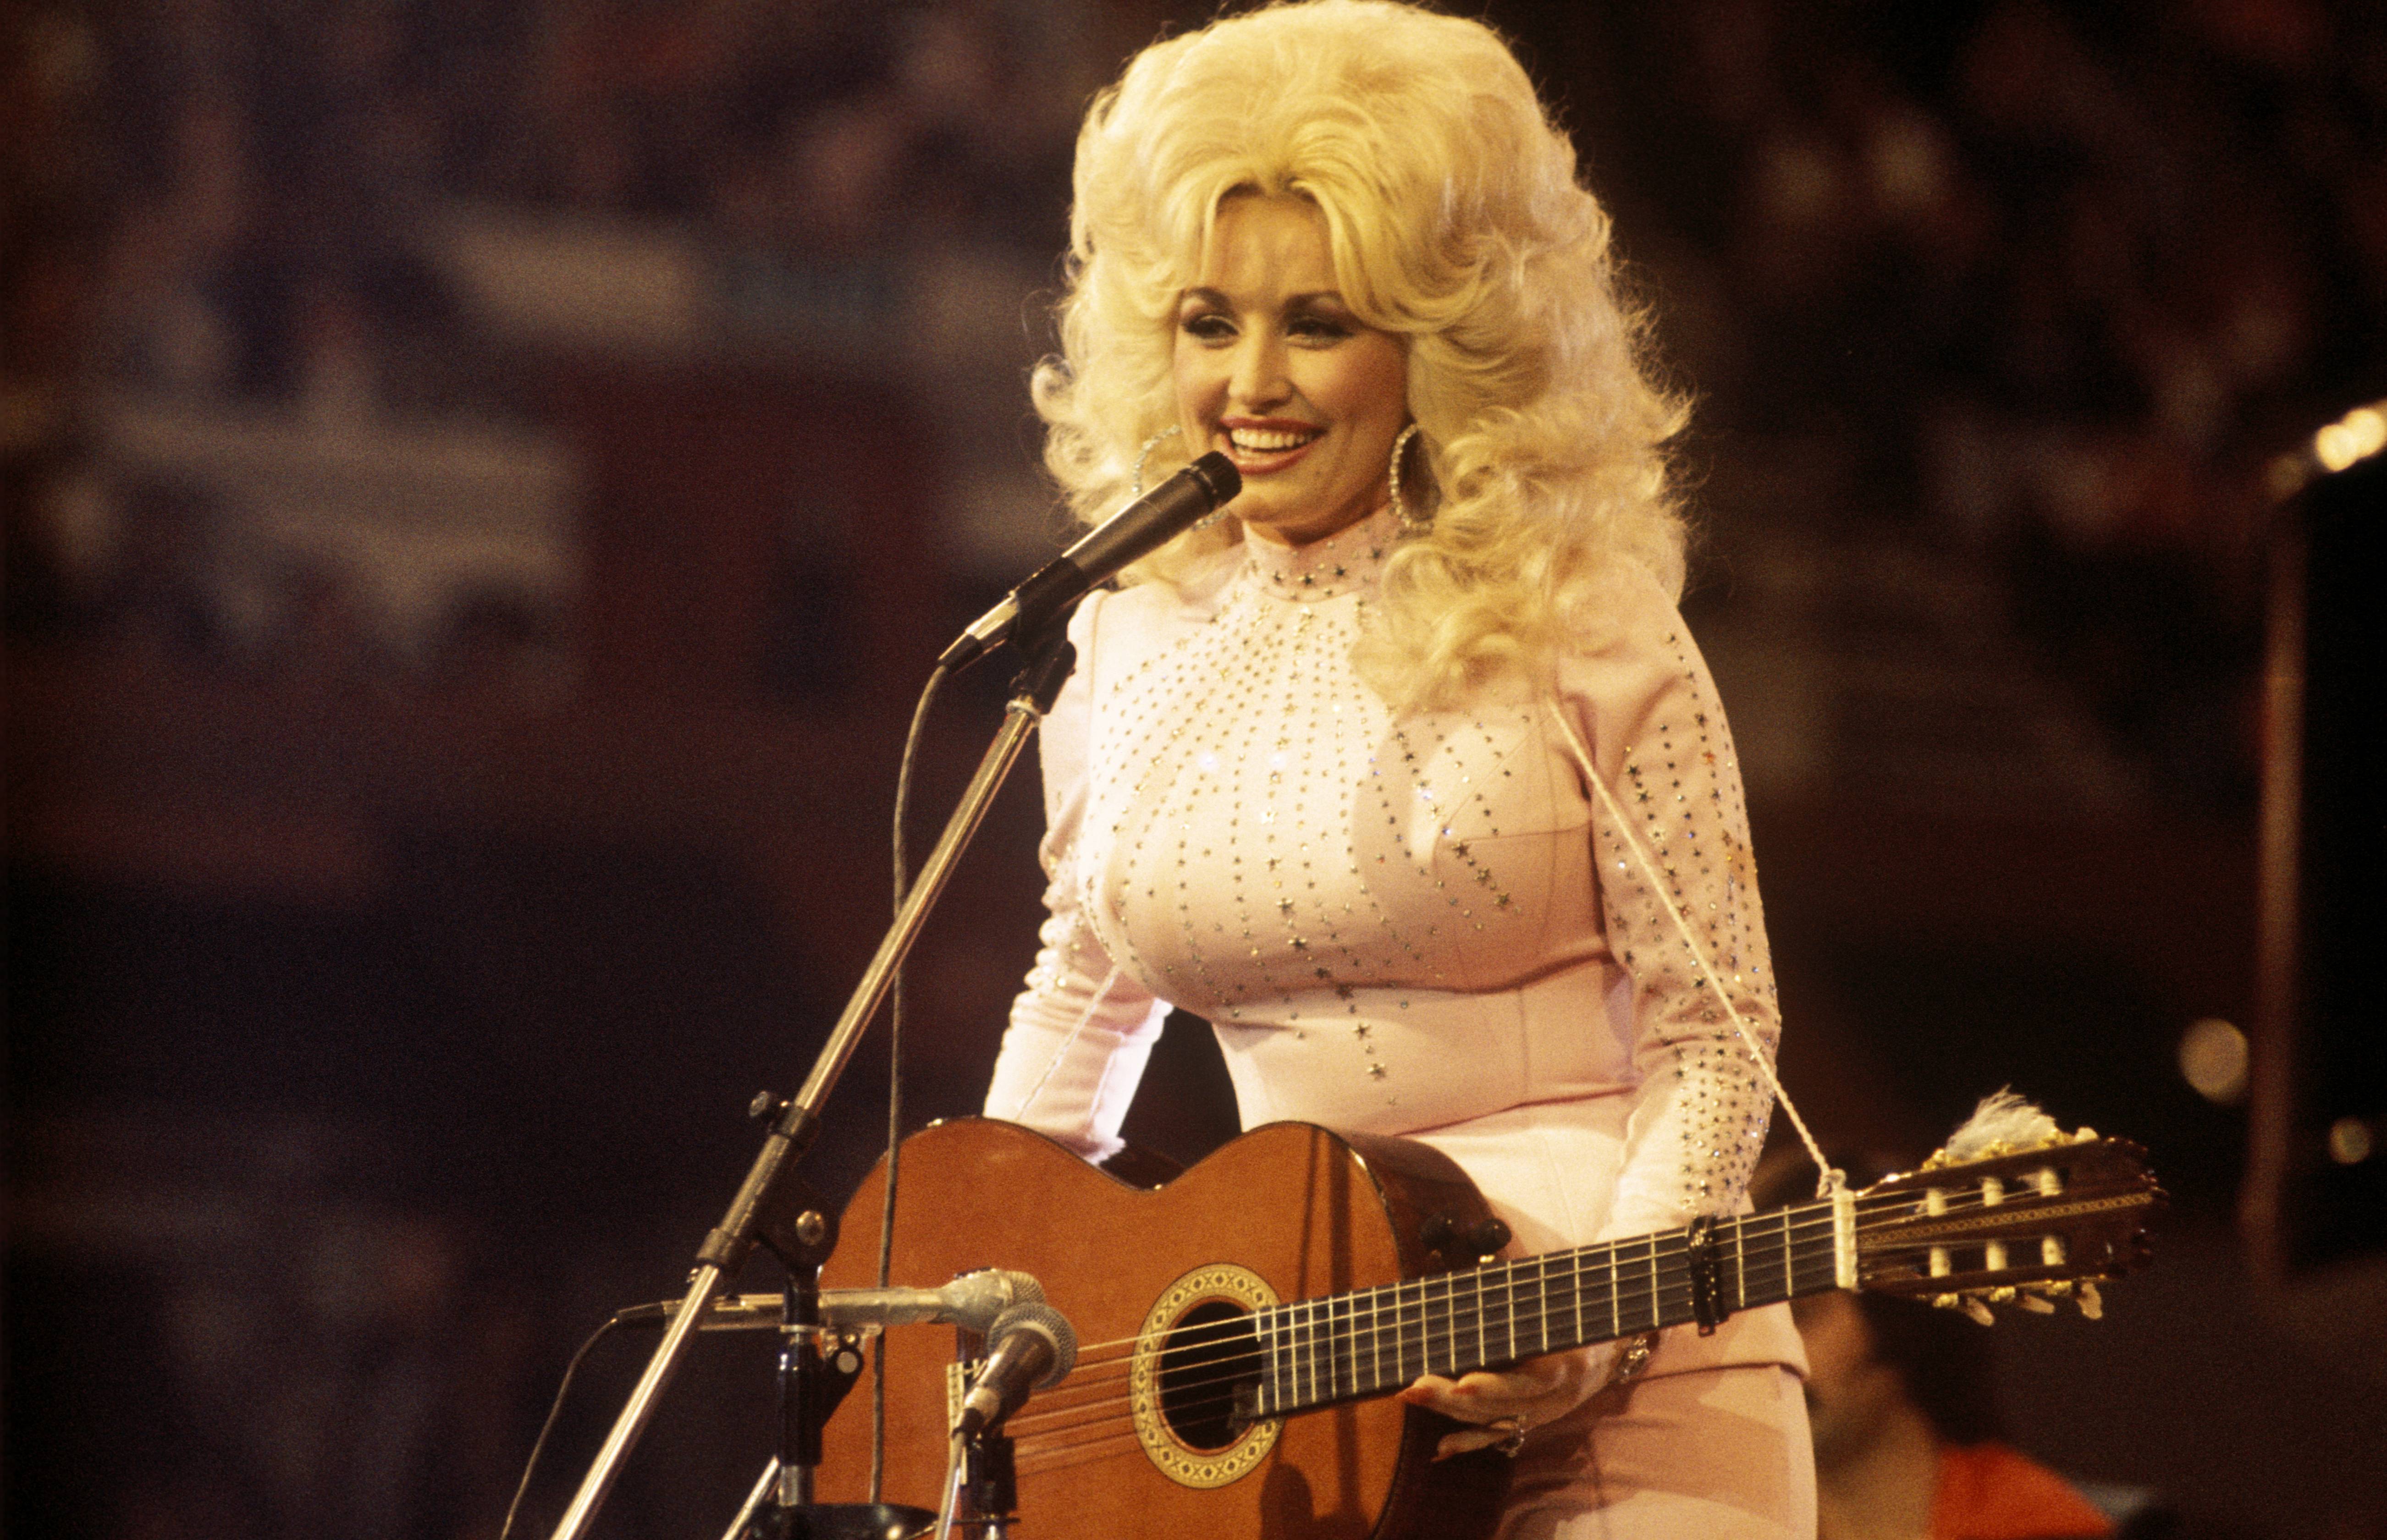 Dolly Parton wears head-to-toe pink, speaking on stage into a microphone.